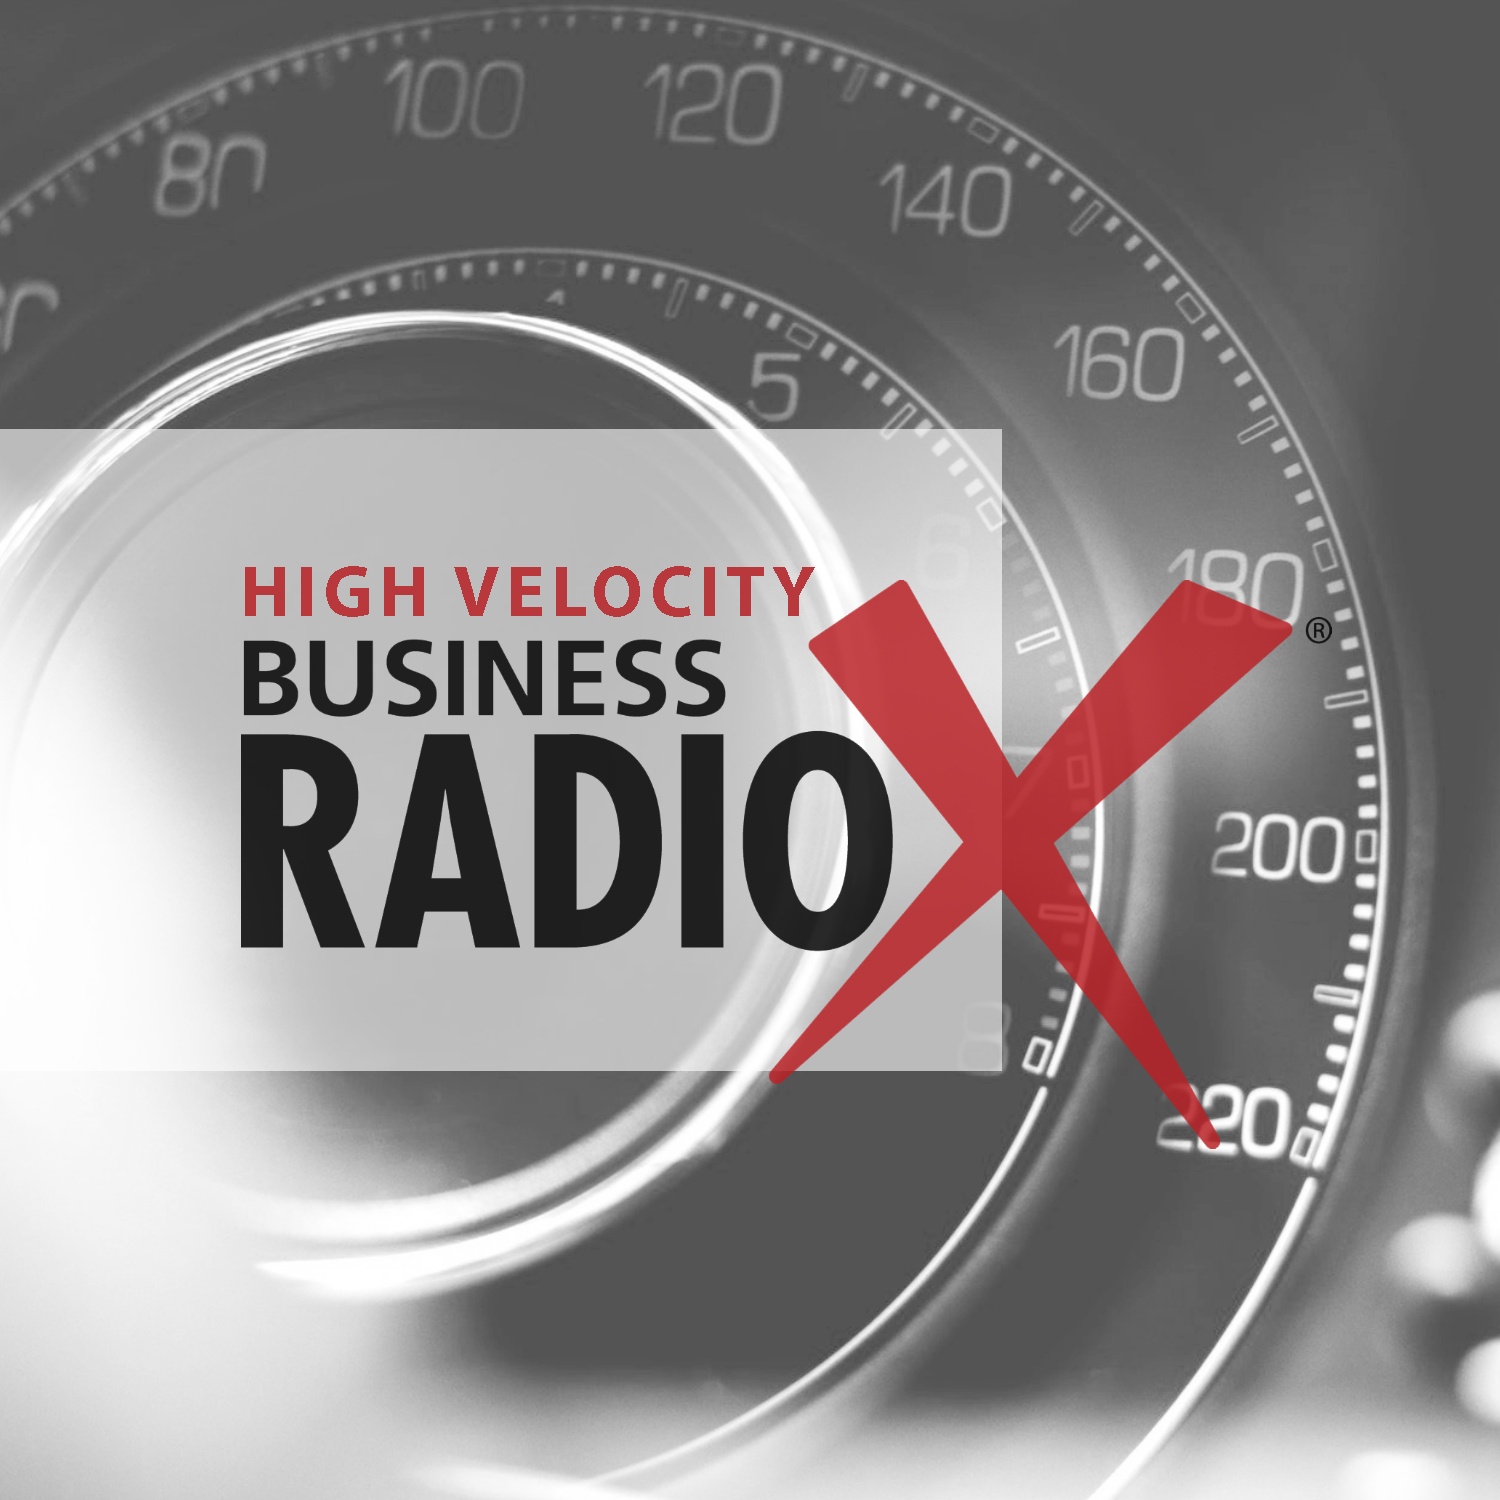 High Velocity Radio Interviews TOP FLR Executive Chef Shane Devereux And ROAM Atlanta’s Yvonne Hill And Erin Wood